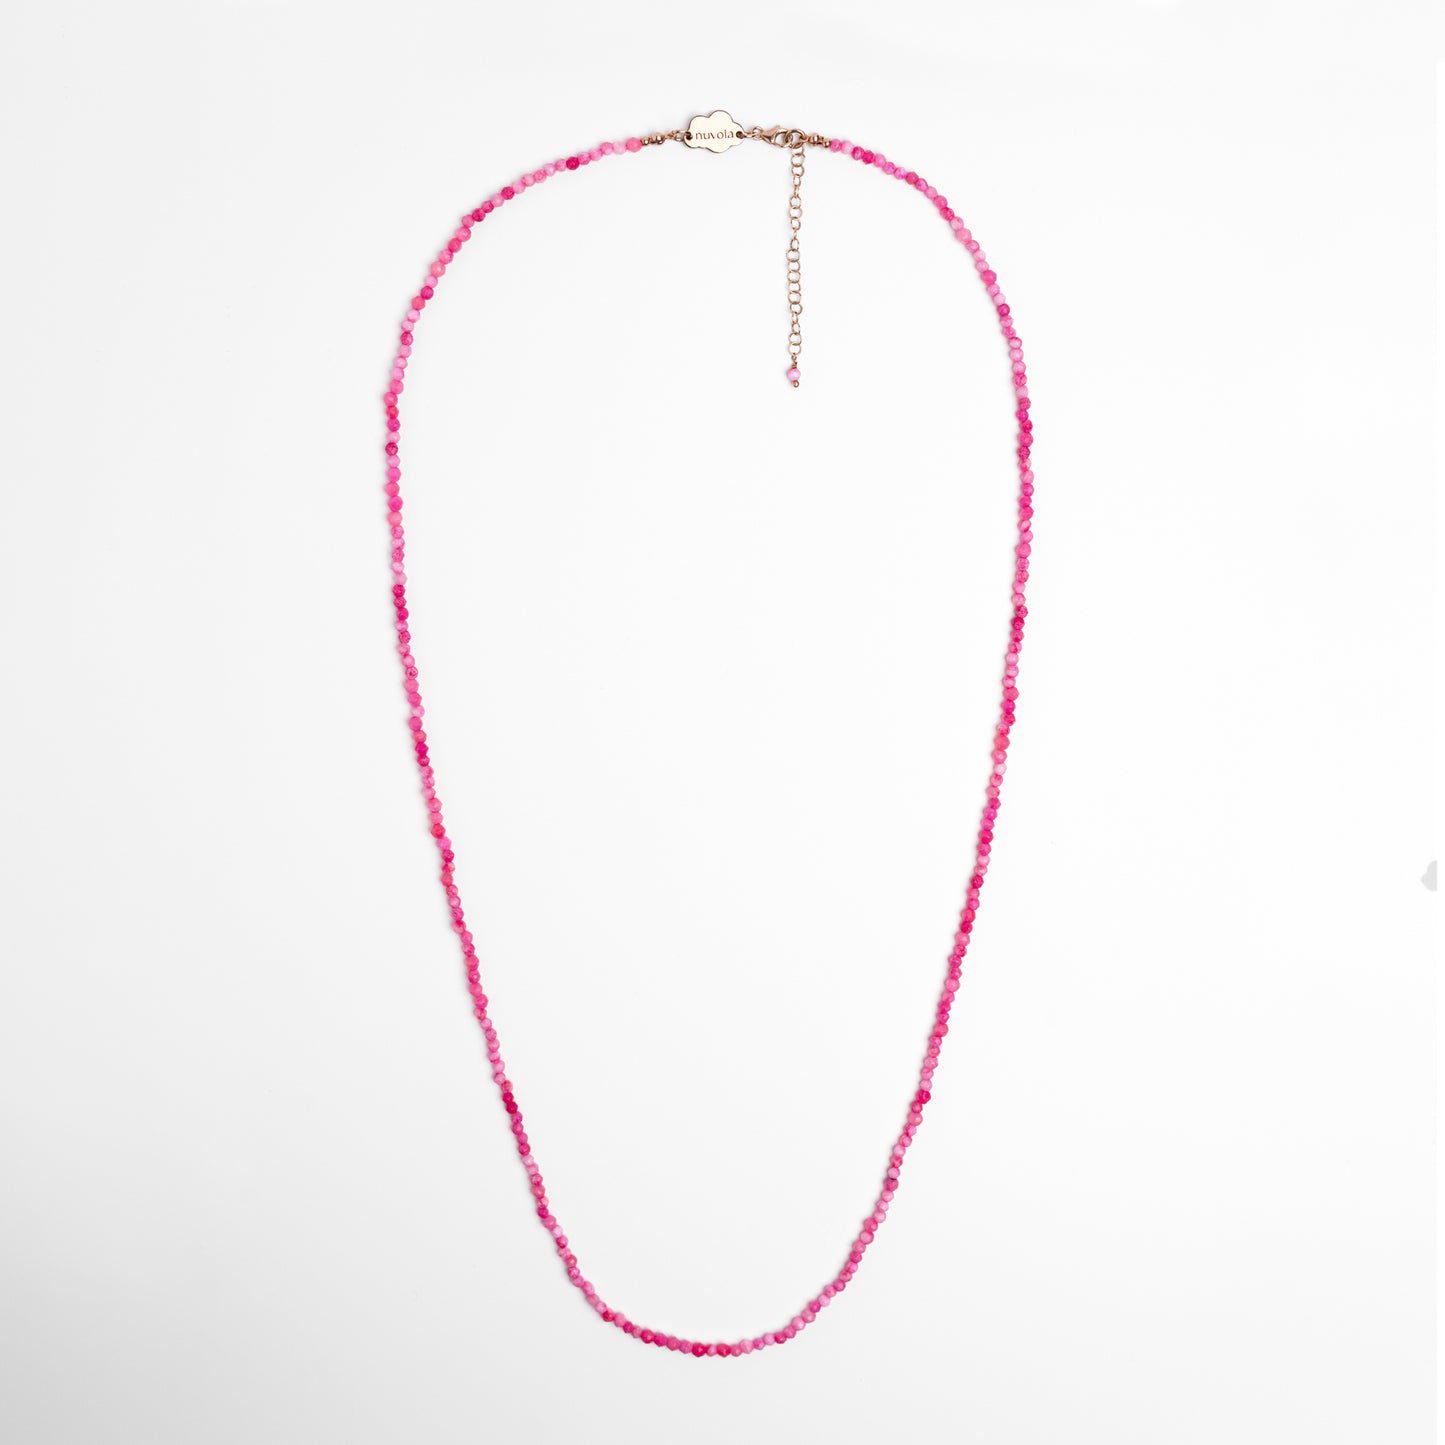 Long pink agate necklace